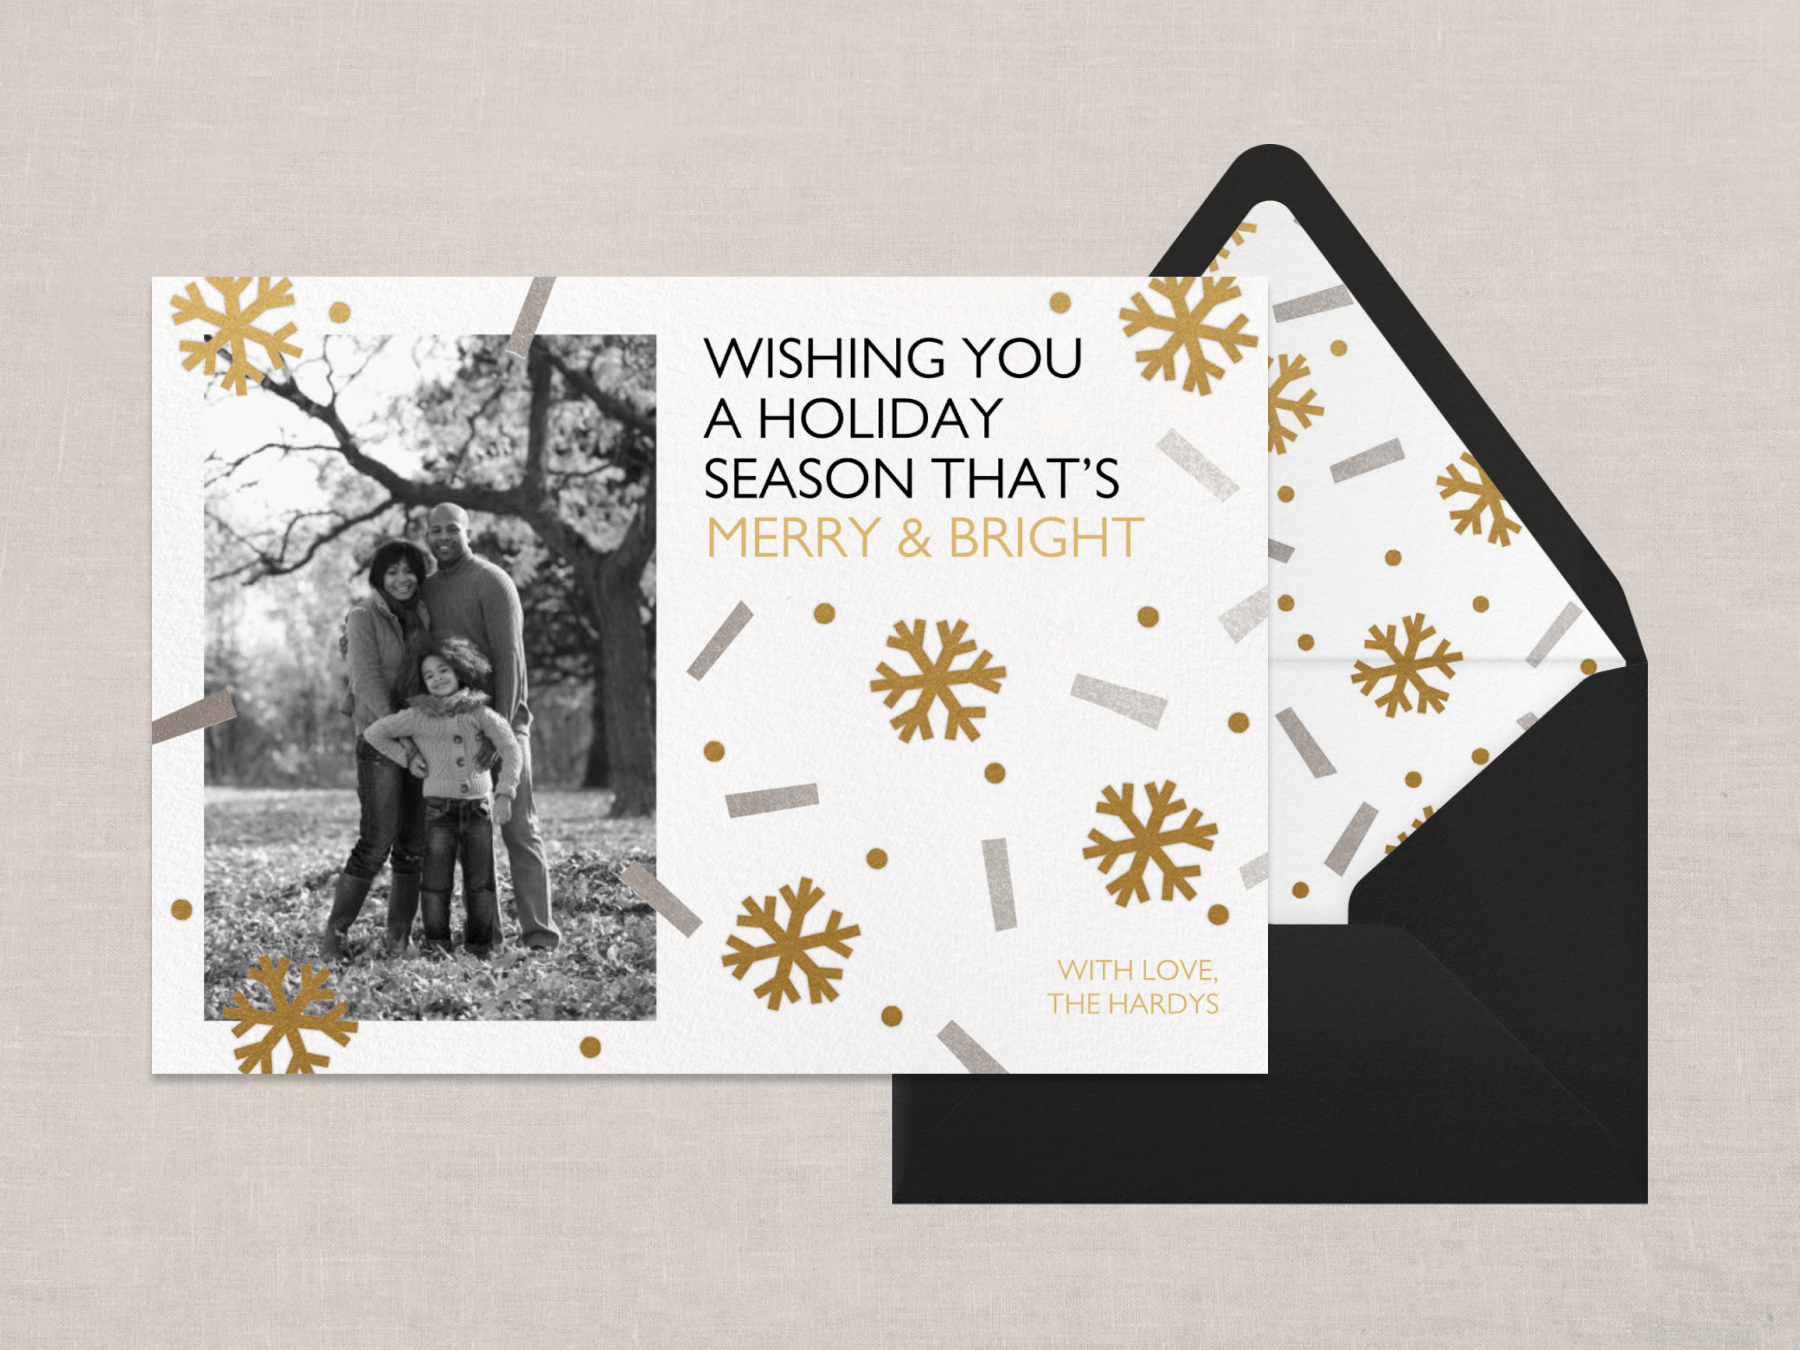 A holiday card with a vertical black and white photo on the left side and gold snowflakes and silver confetti.